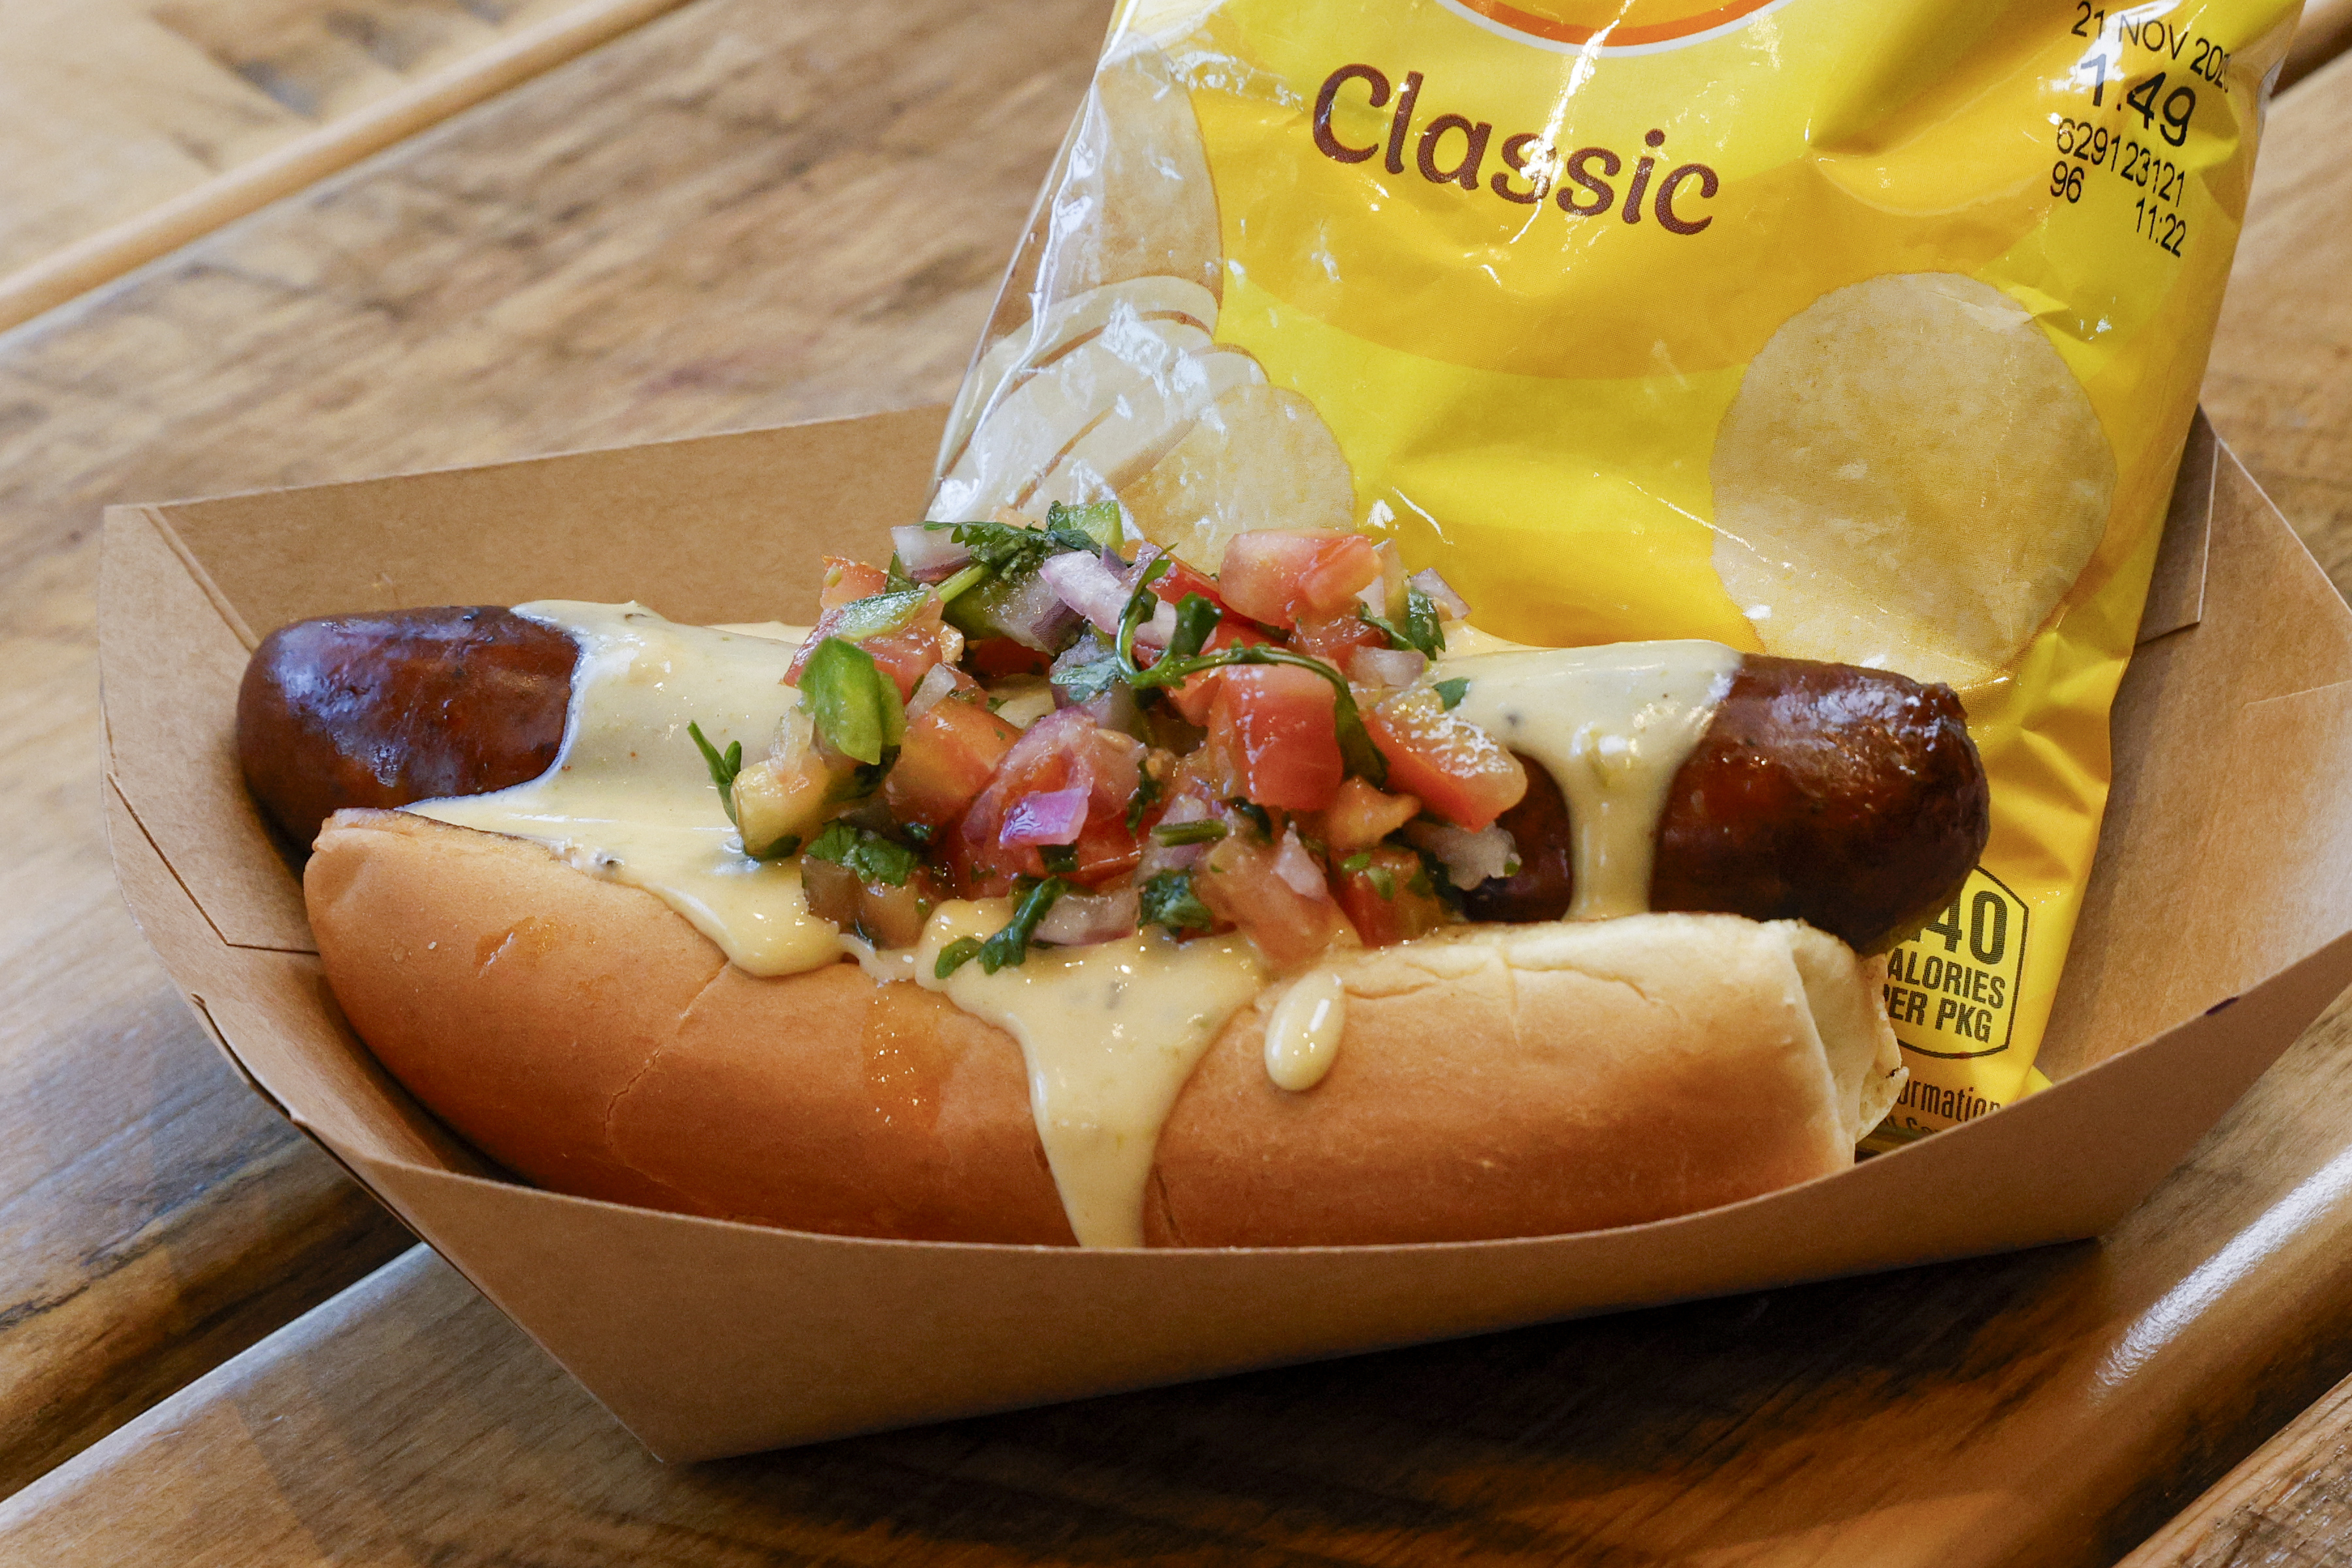 Texas Rangers Unveil Exciting New Ballpark Food for 2023 MLB Season -  Sports Illustrated Texas Rangers News, Analysis and More